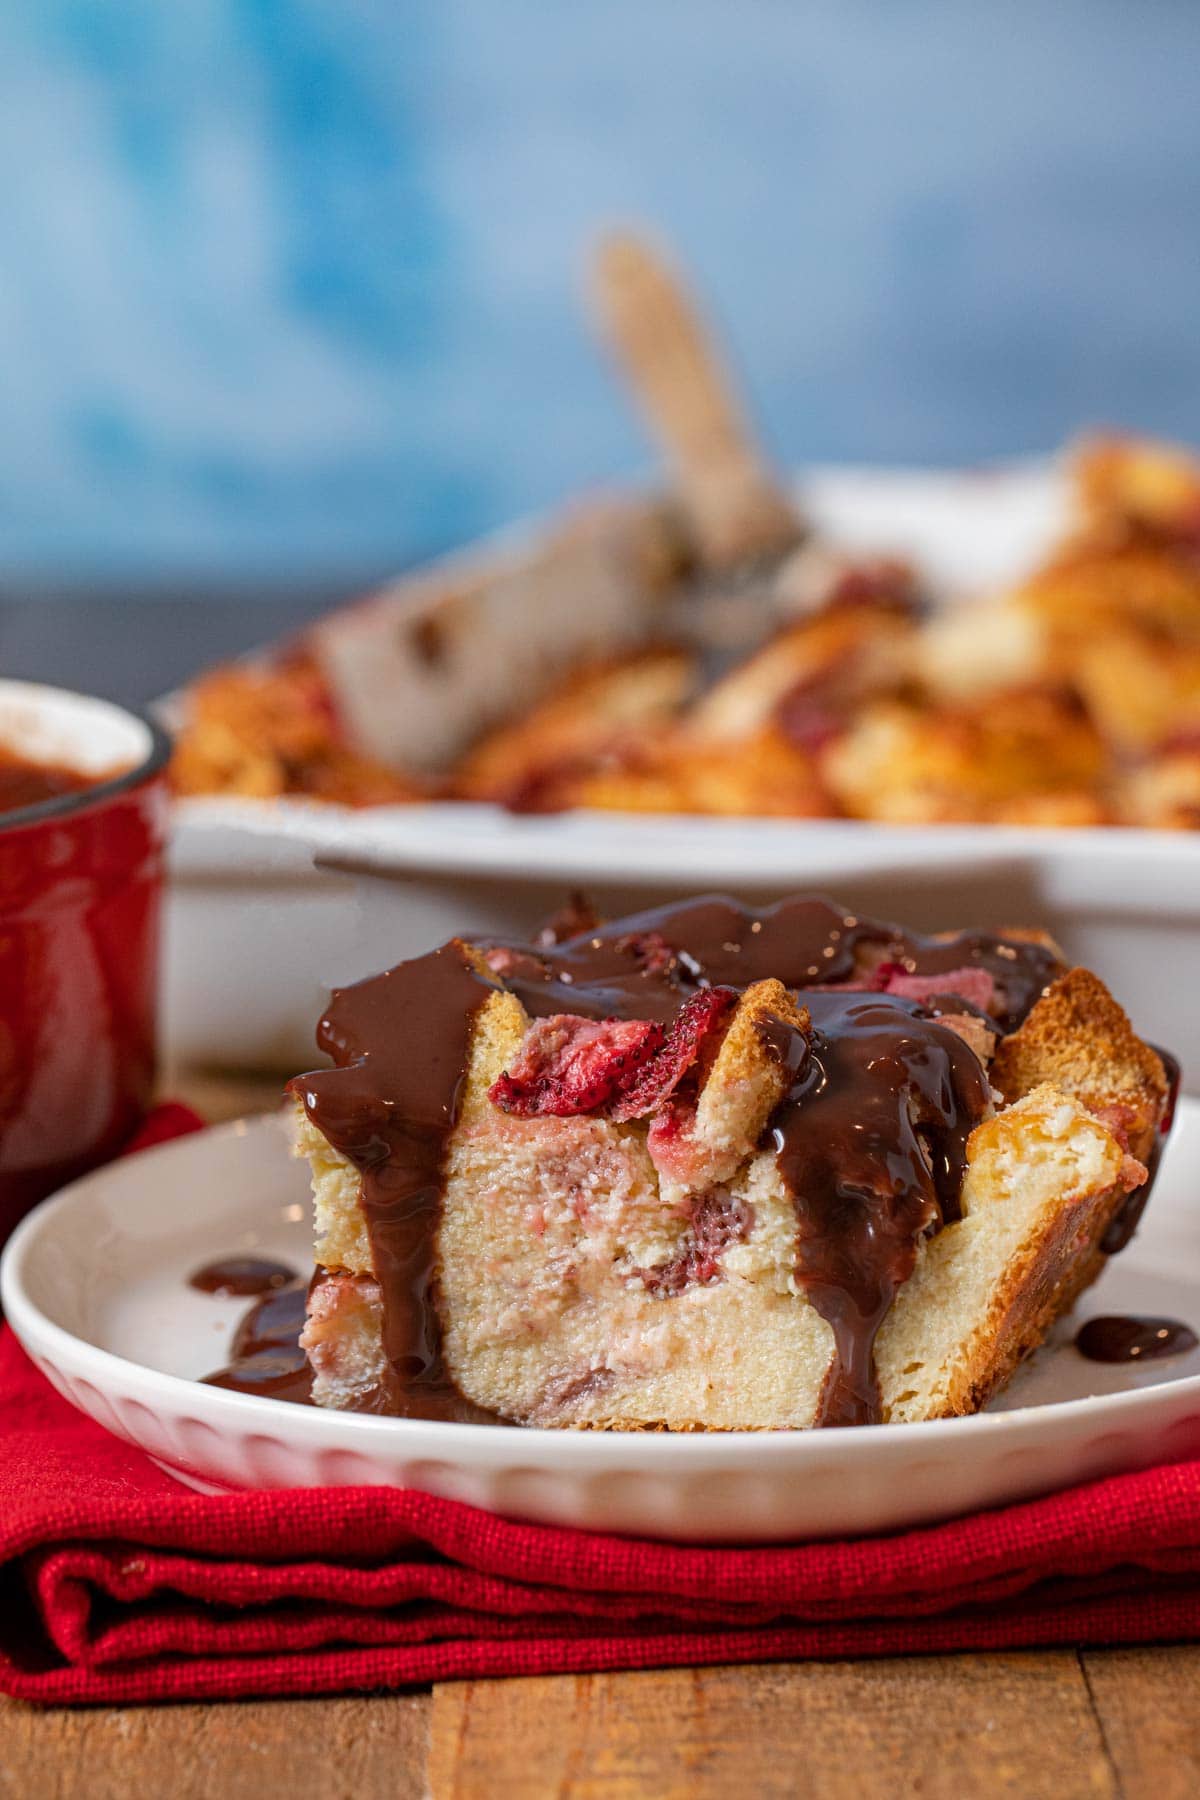 Strawberry Nutella Bread Pudding serving on plate with Nutella sauce